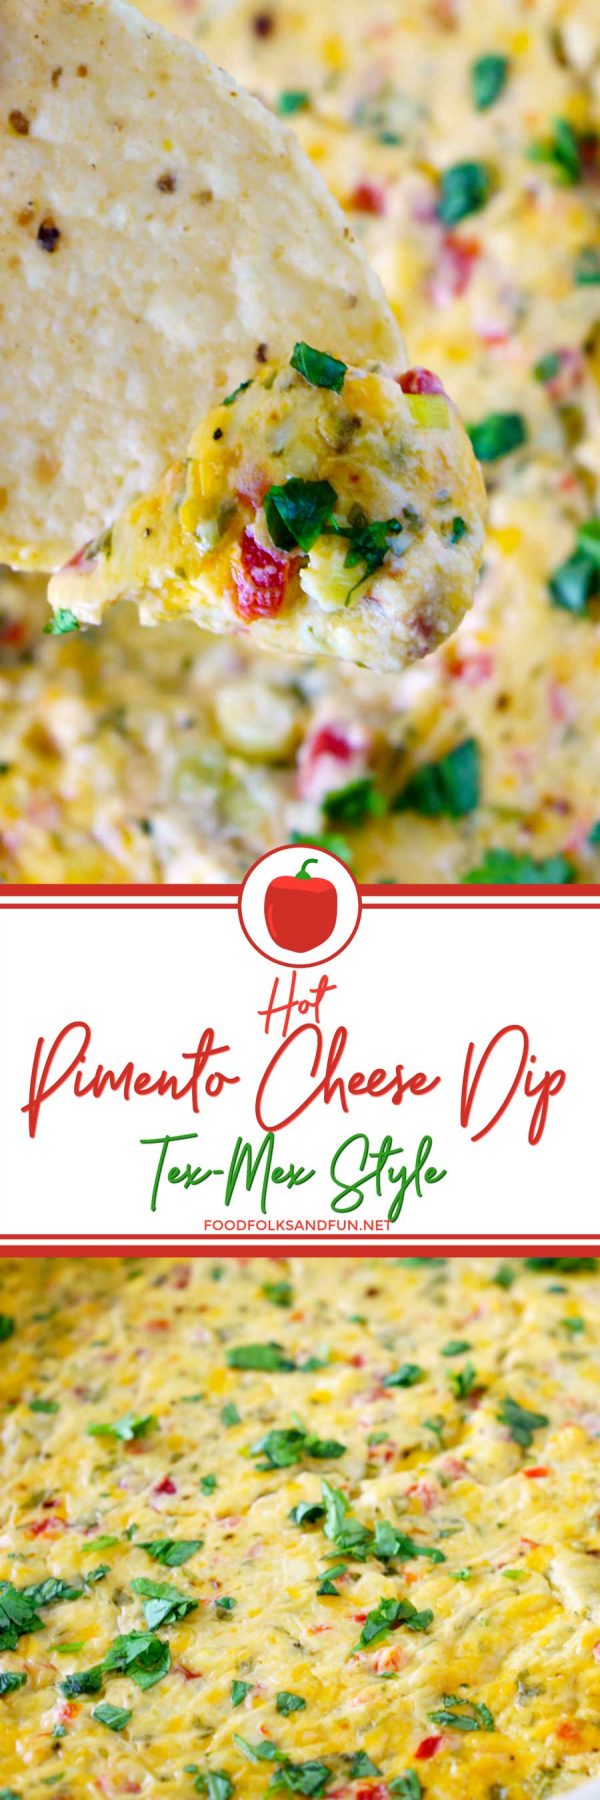 Hot Pimento Cheese Dip - the stuff your geese-filled dreams are made of!